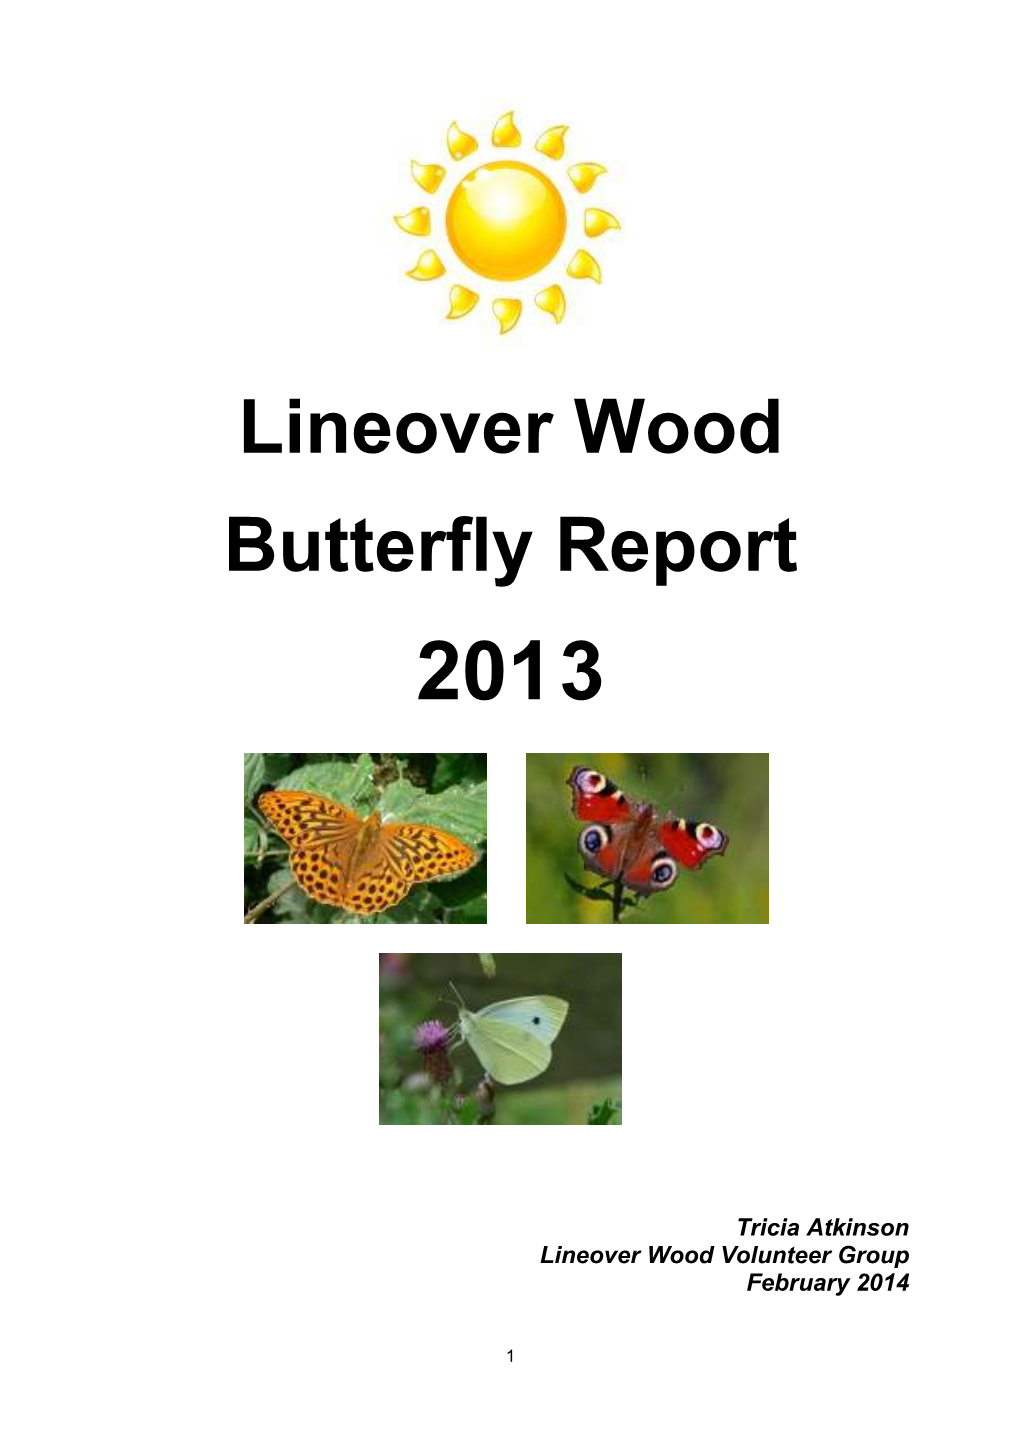 Lineover Wood Butterfly Report